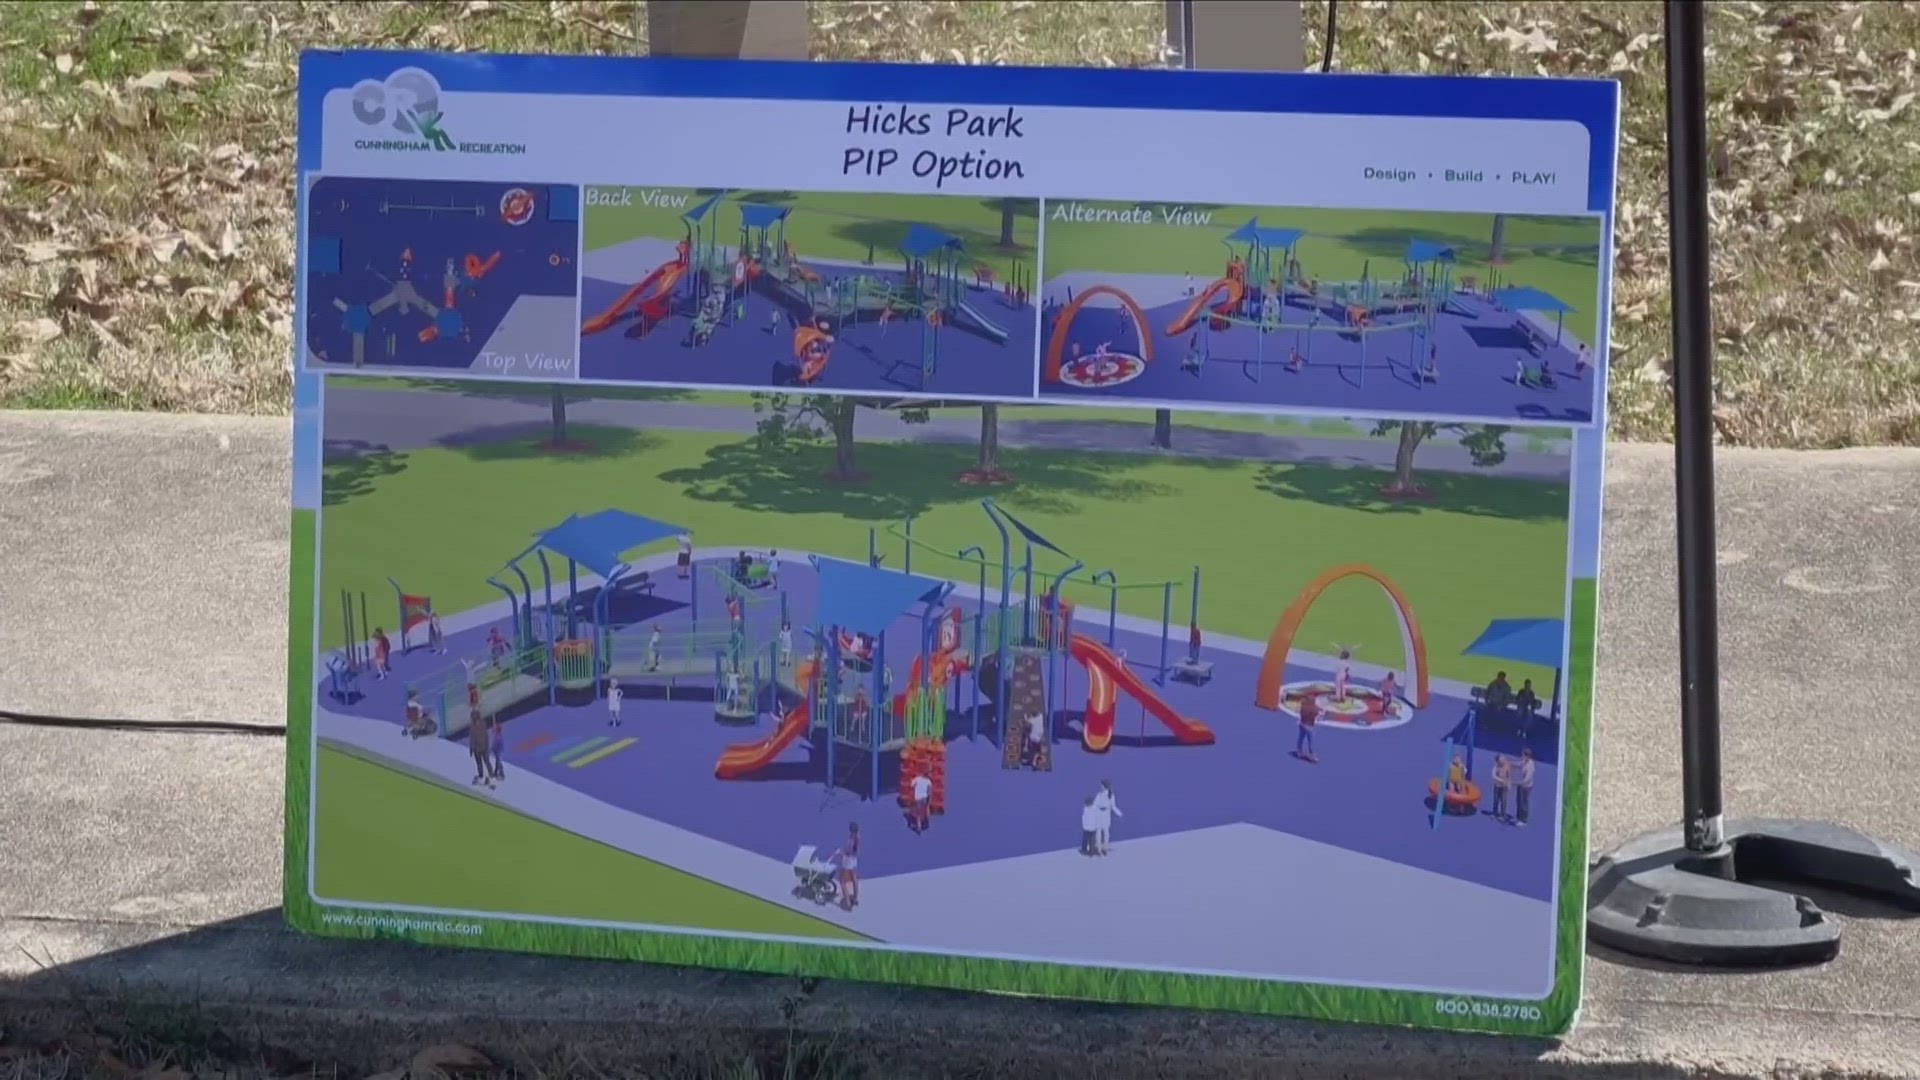 The playground is meant to provide the perfect place for children with disabilities and special needs to enjoy time at the park like other kids.